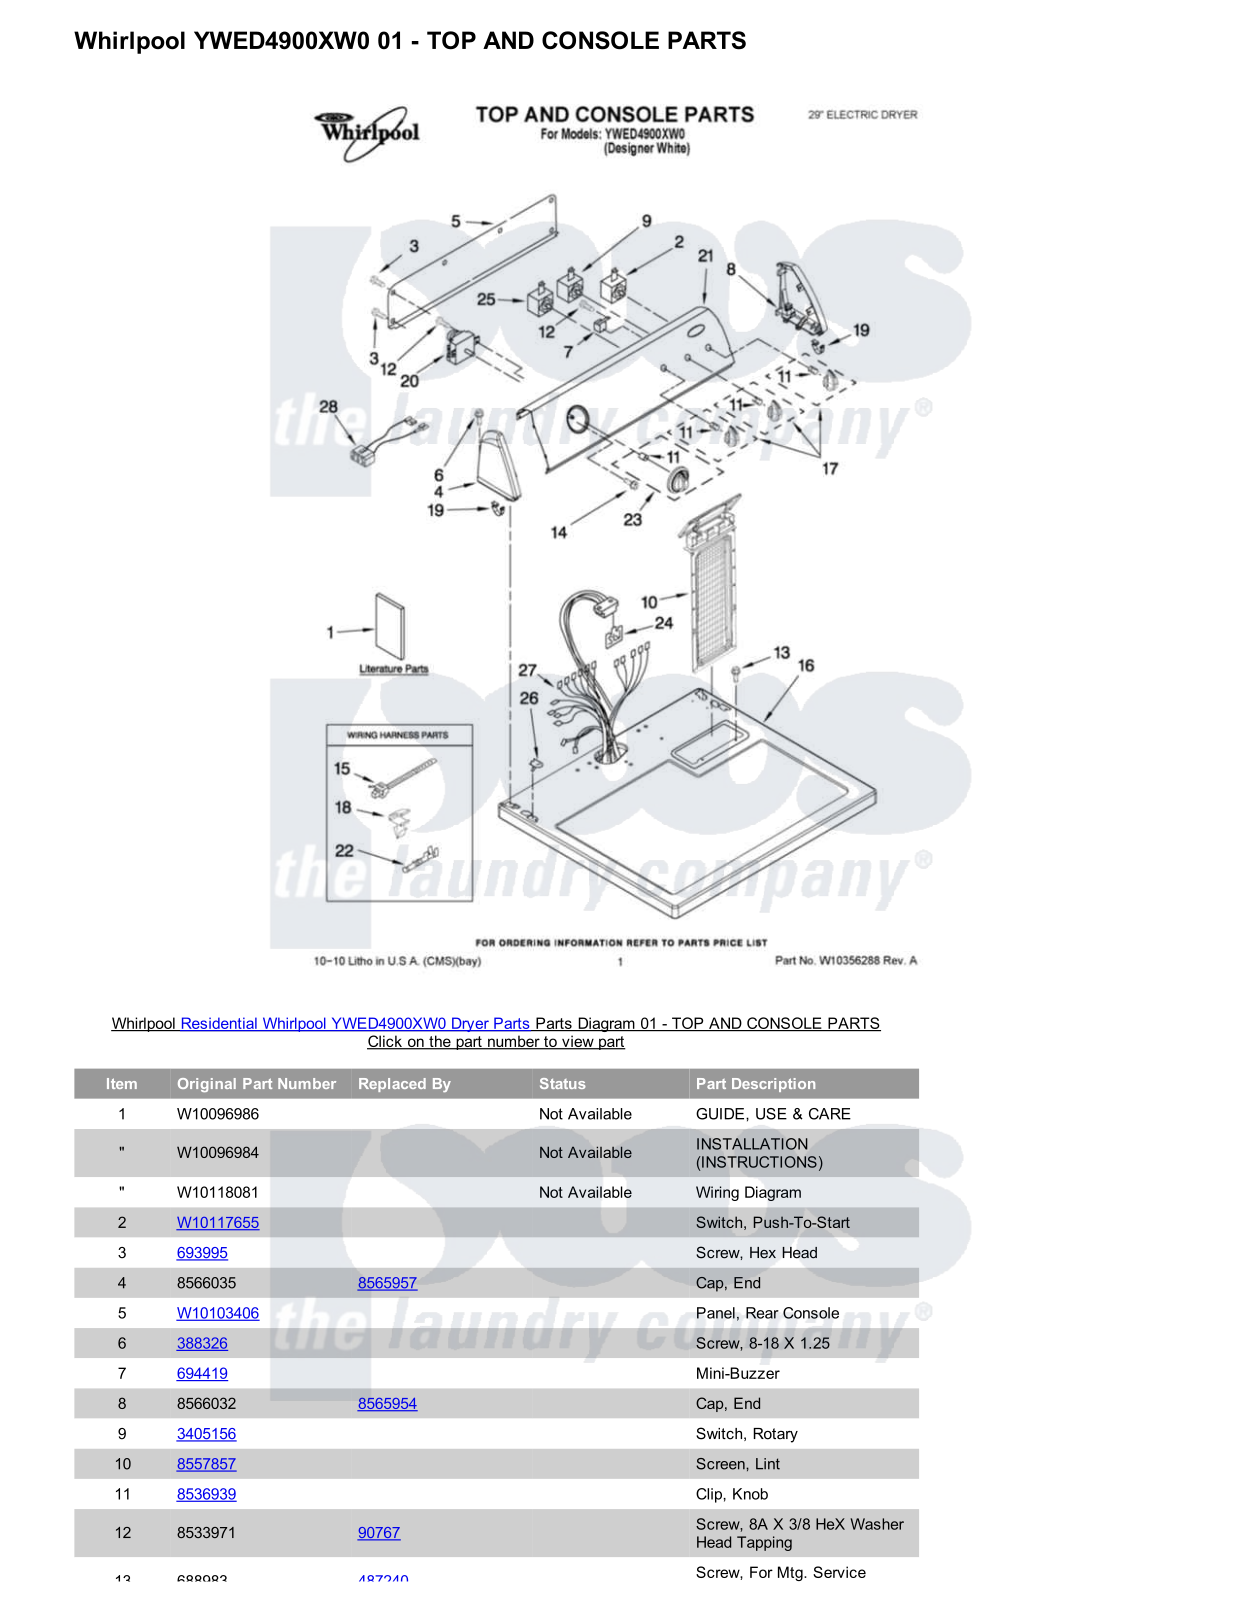 Whirlpool YWED4900XW0 Parts Diagram